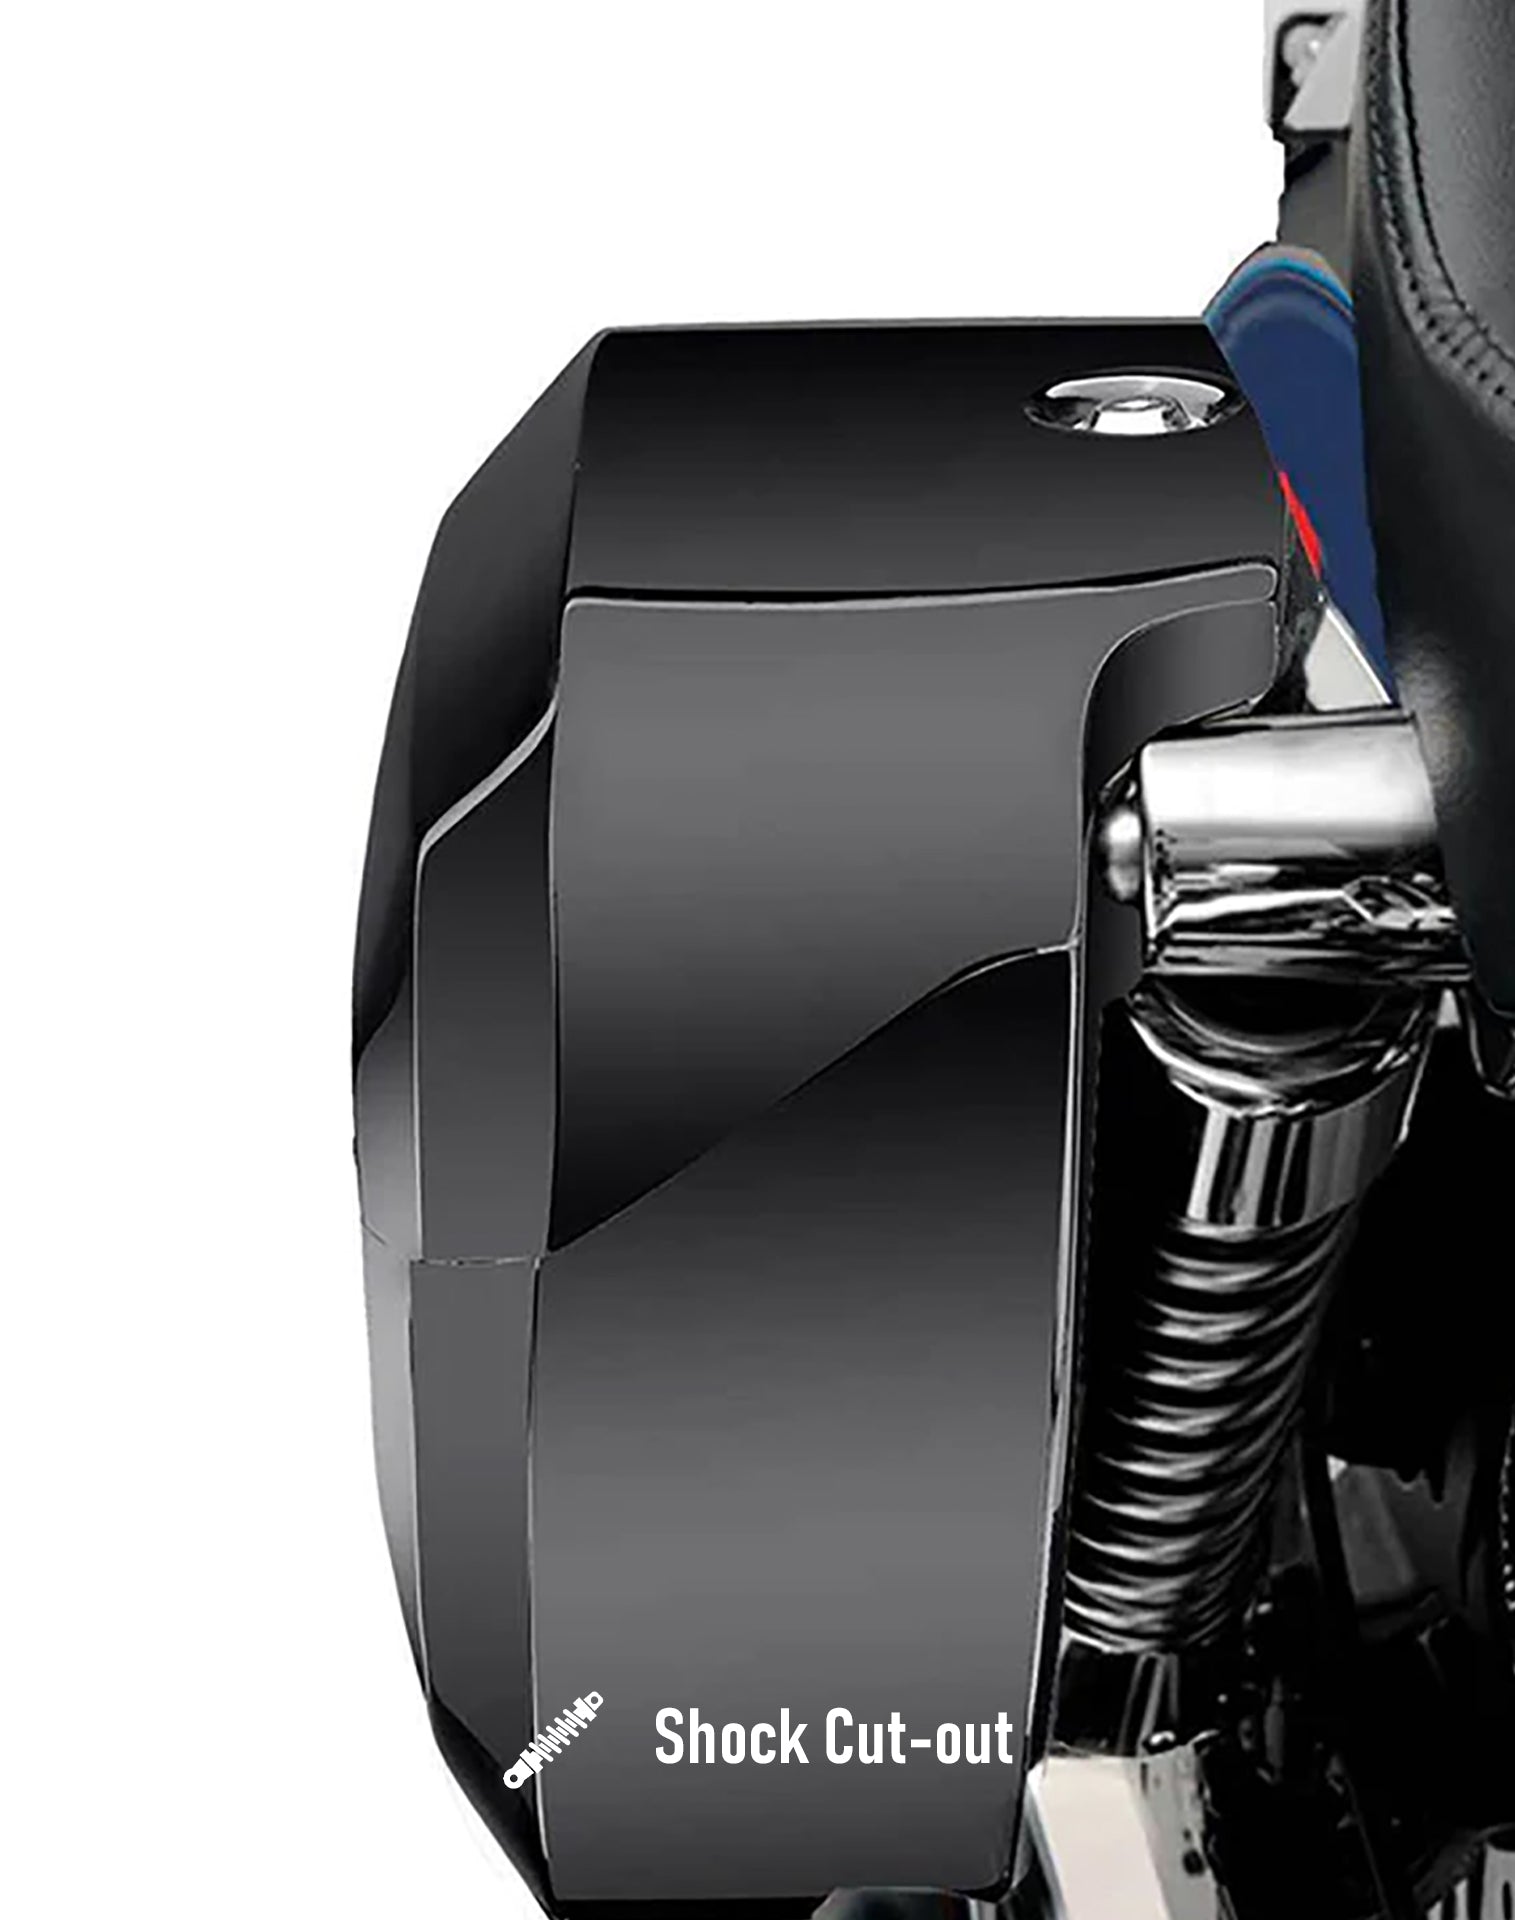 Viking Lamellar Raven Extra Large Shock Cut Out Painted Motorcycle Hard Saddlebags For Harley Sportster 1200 Nightster Xl1200N Hard Shell Construction